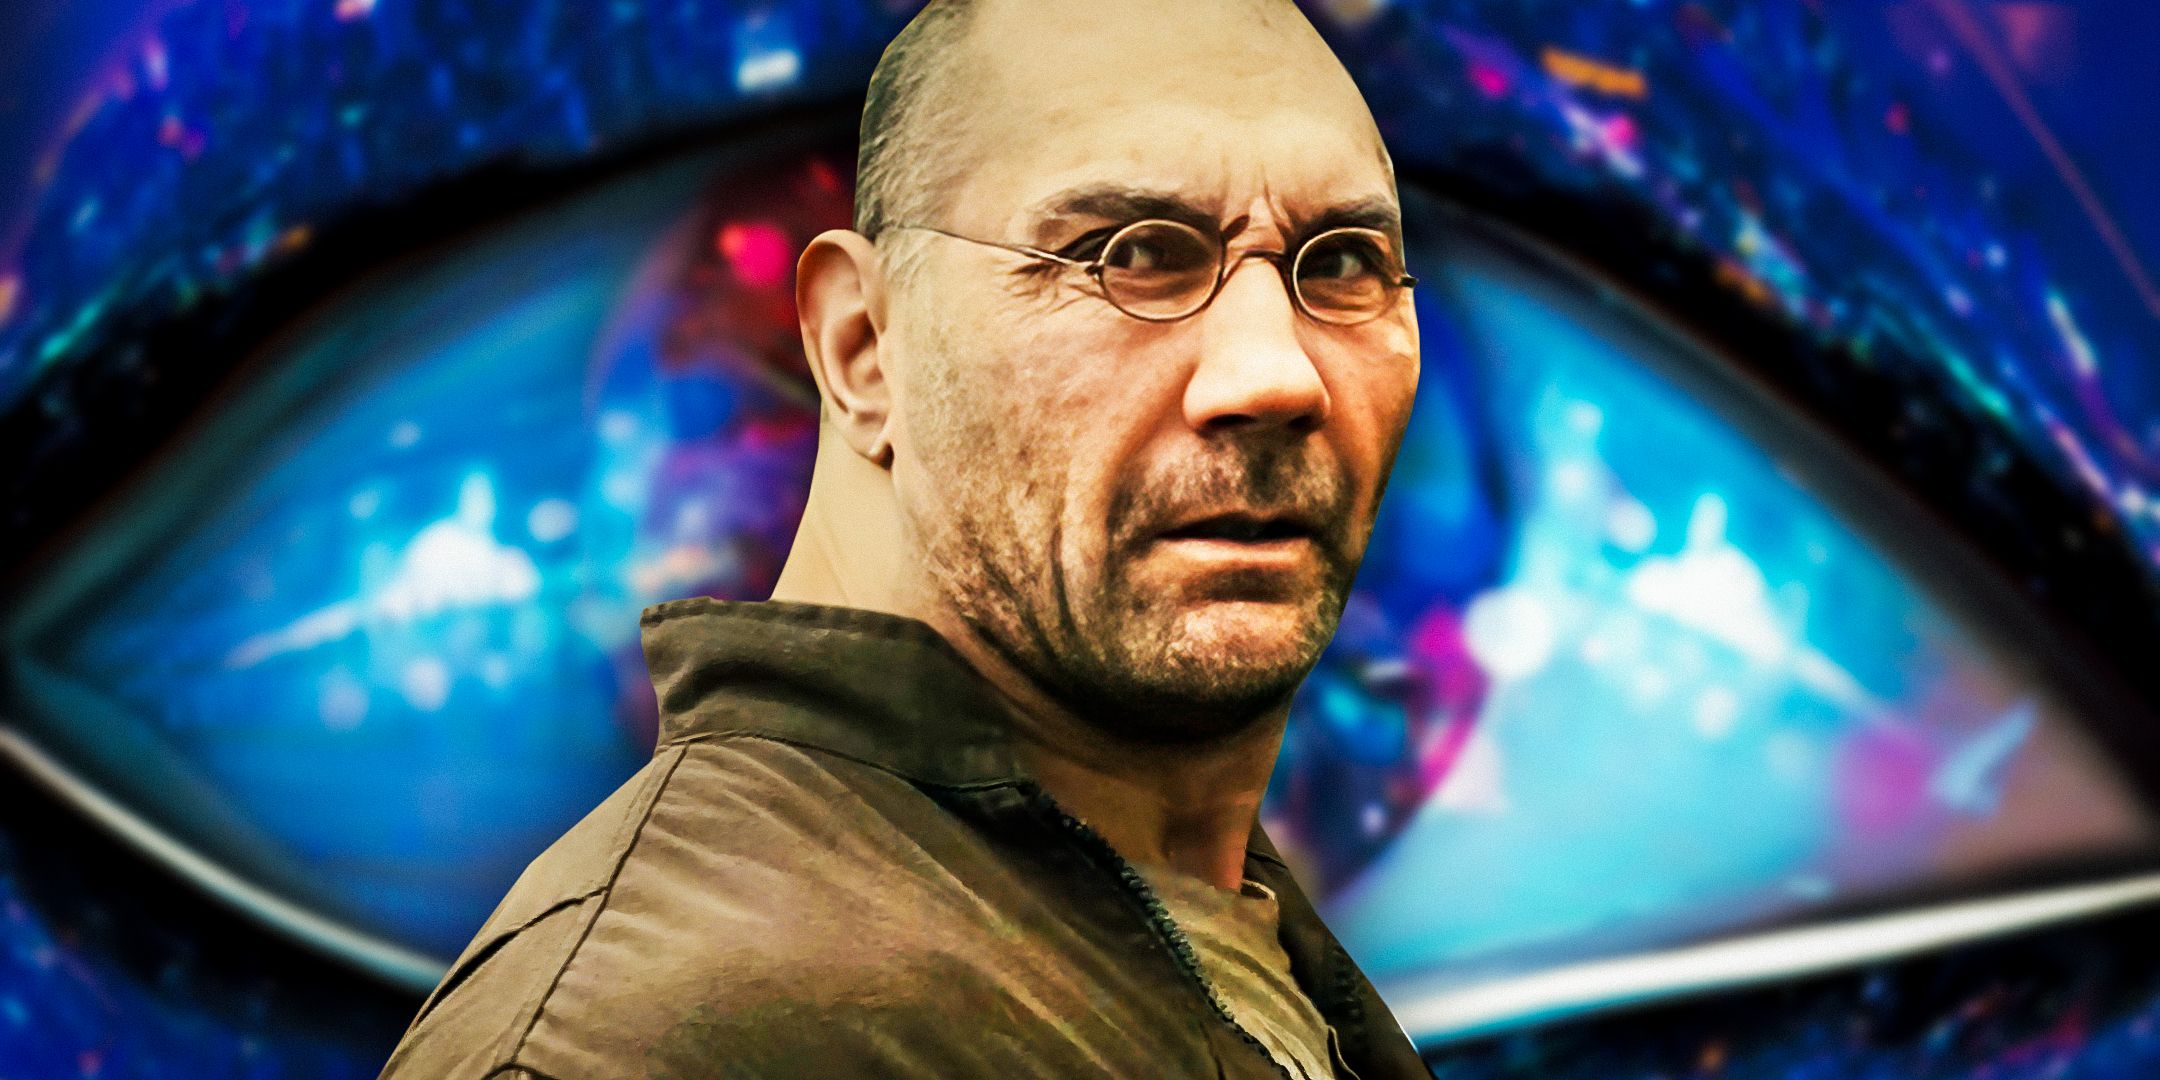 Dave Bautista as Sapper Morton from Blade Runner 2049 in front of a blue eyeball